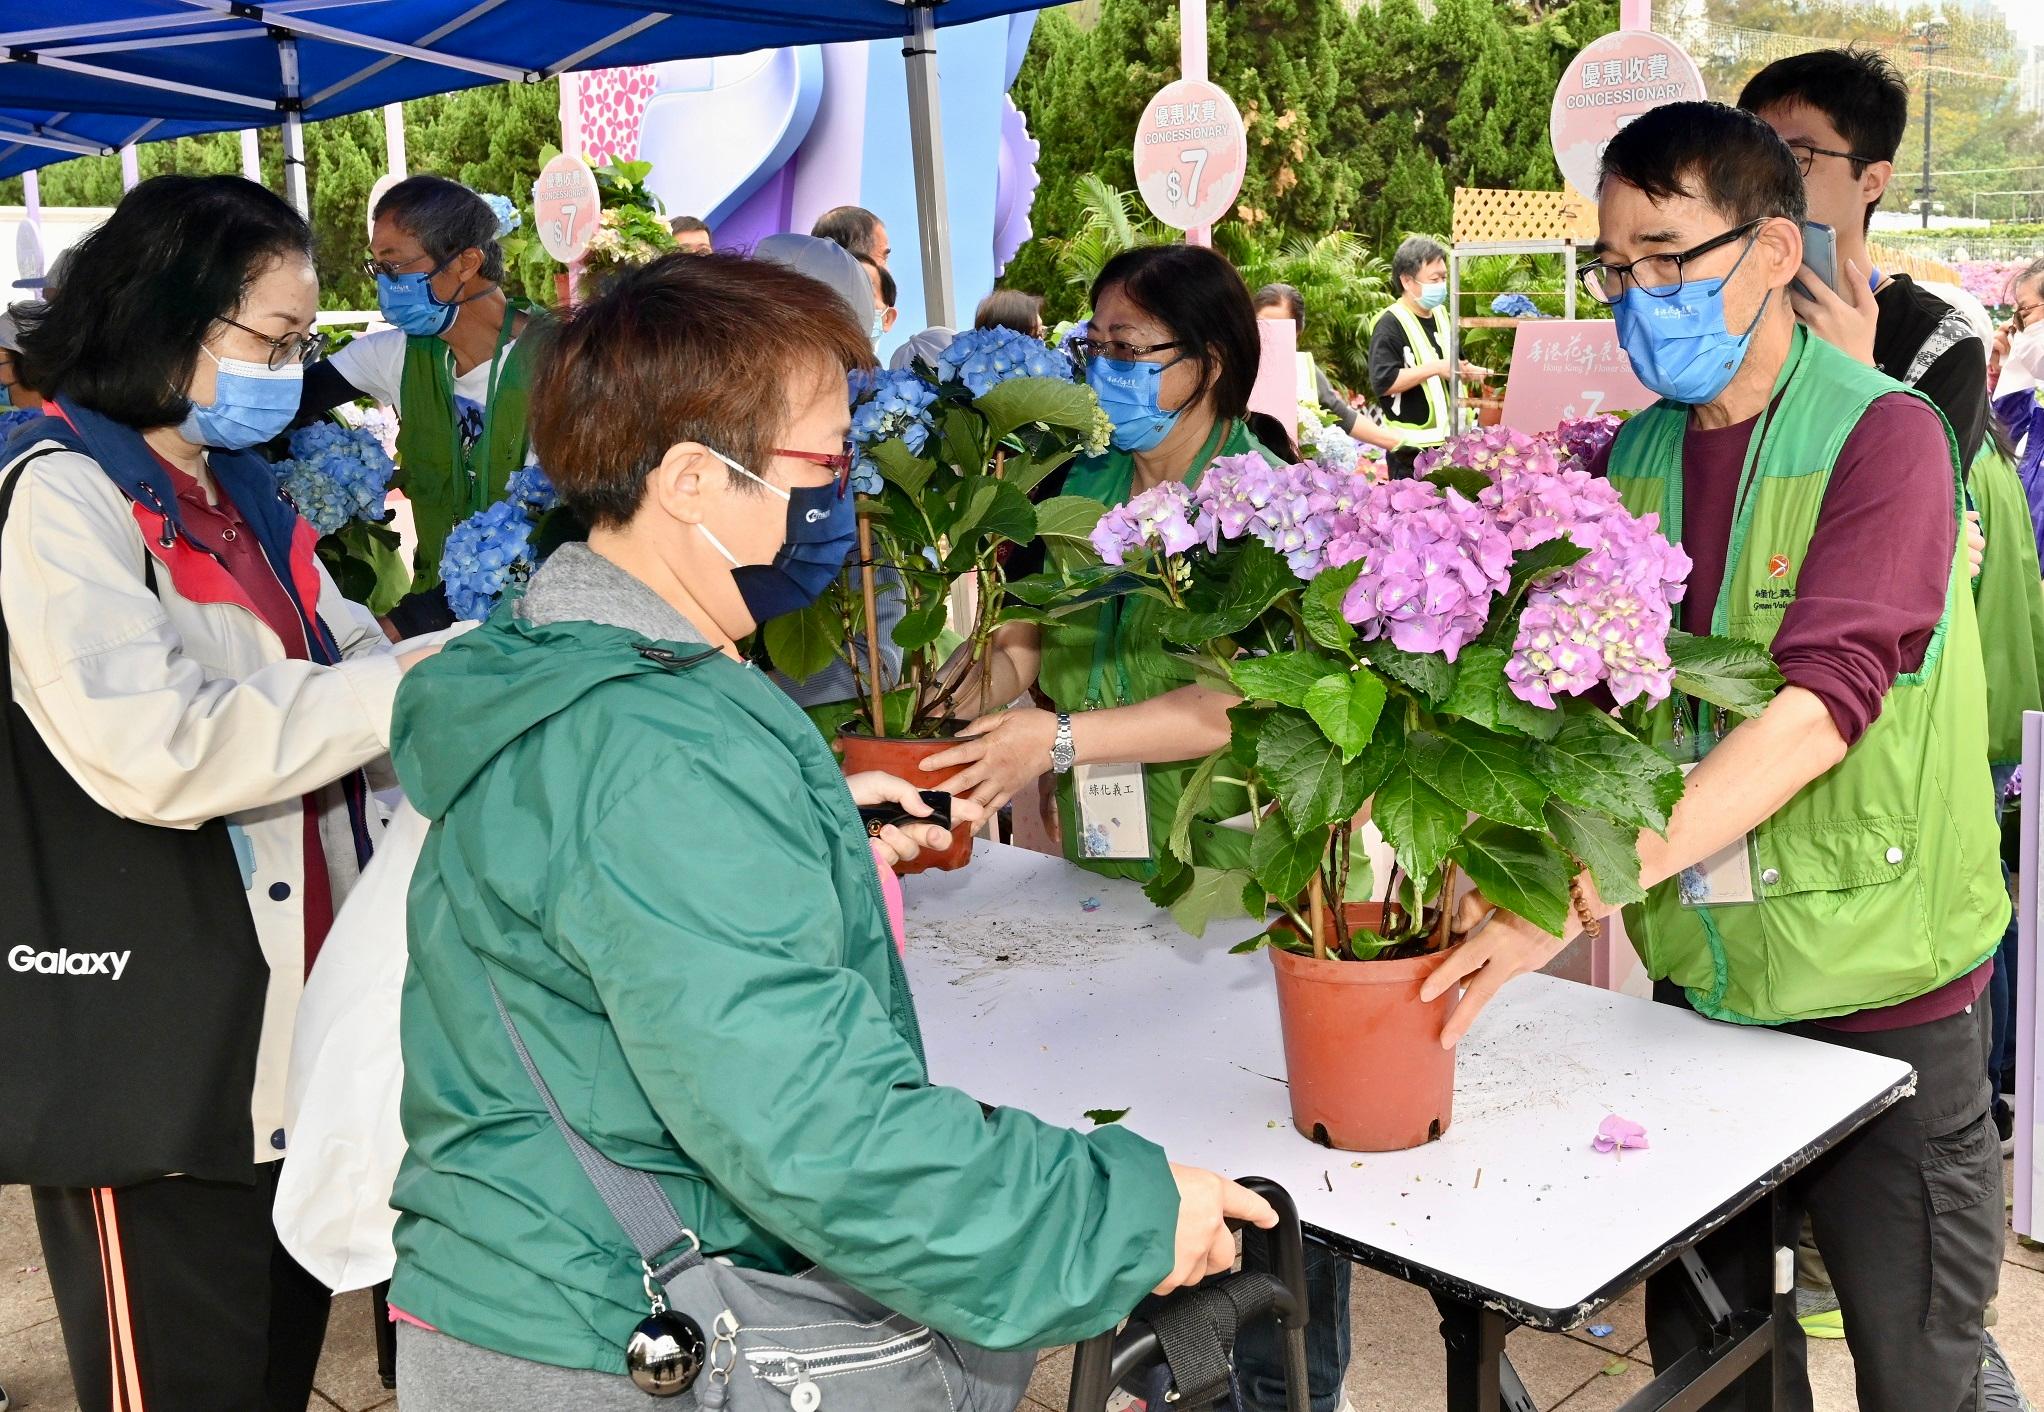 The Green Recycling Day activities for the Hong Kong Flower Show organised by the Leisure and Cultural Services Department were held today (March 20) and will continue tomorrow (March 21) to reinforce green measures and reduce waste, reflecting the department's commitment to implementing green measures for environmental protection in its large-scale events. Photo shows volunteers distributing pots of flowers to the public.